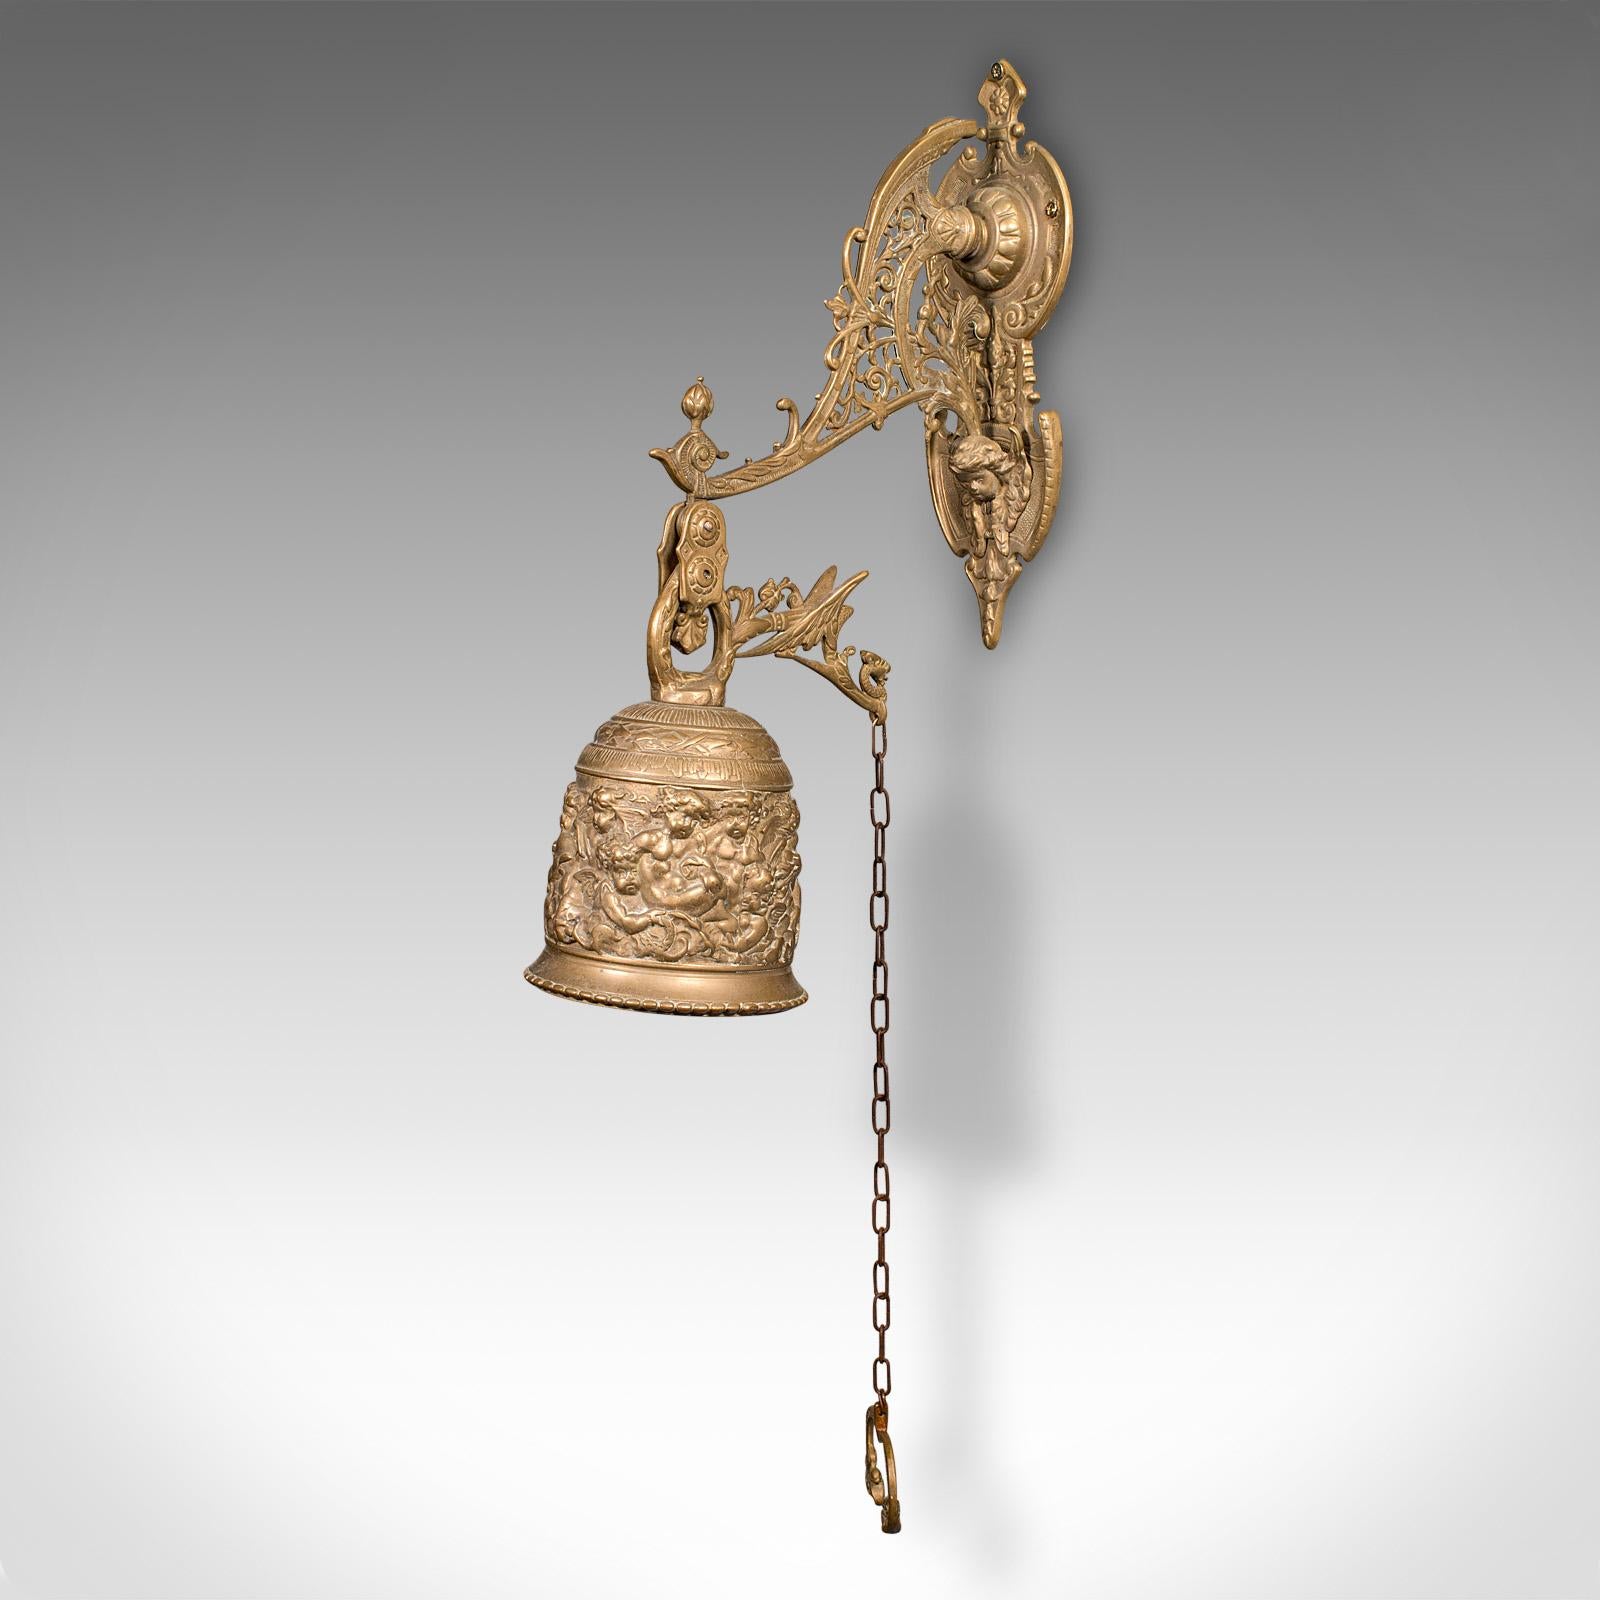 European Antique School Bell, Continental, Brass, Wall Mounted Chime, Ornate, Victorian For Sale